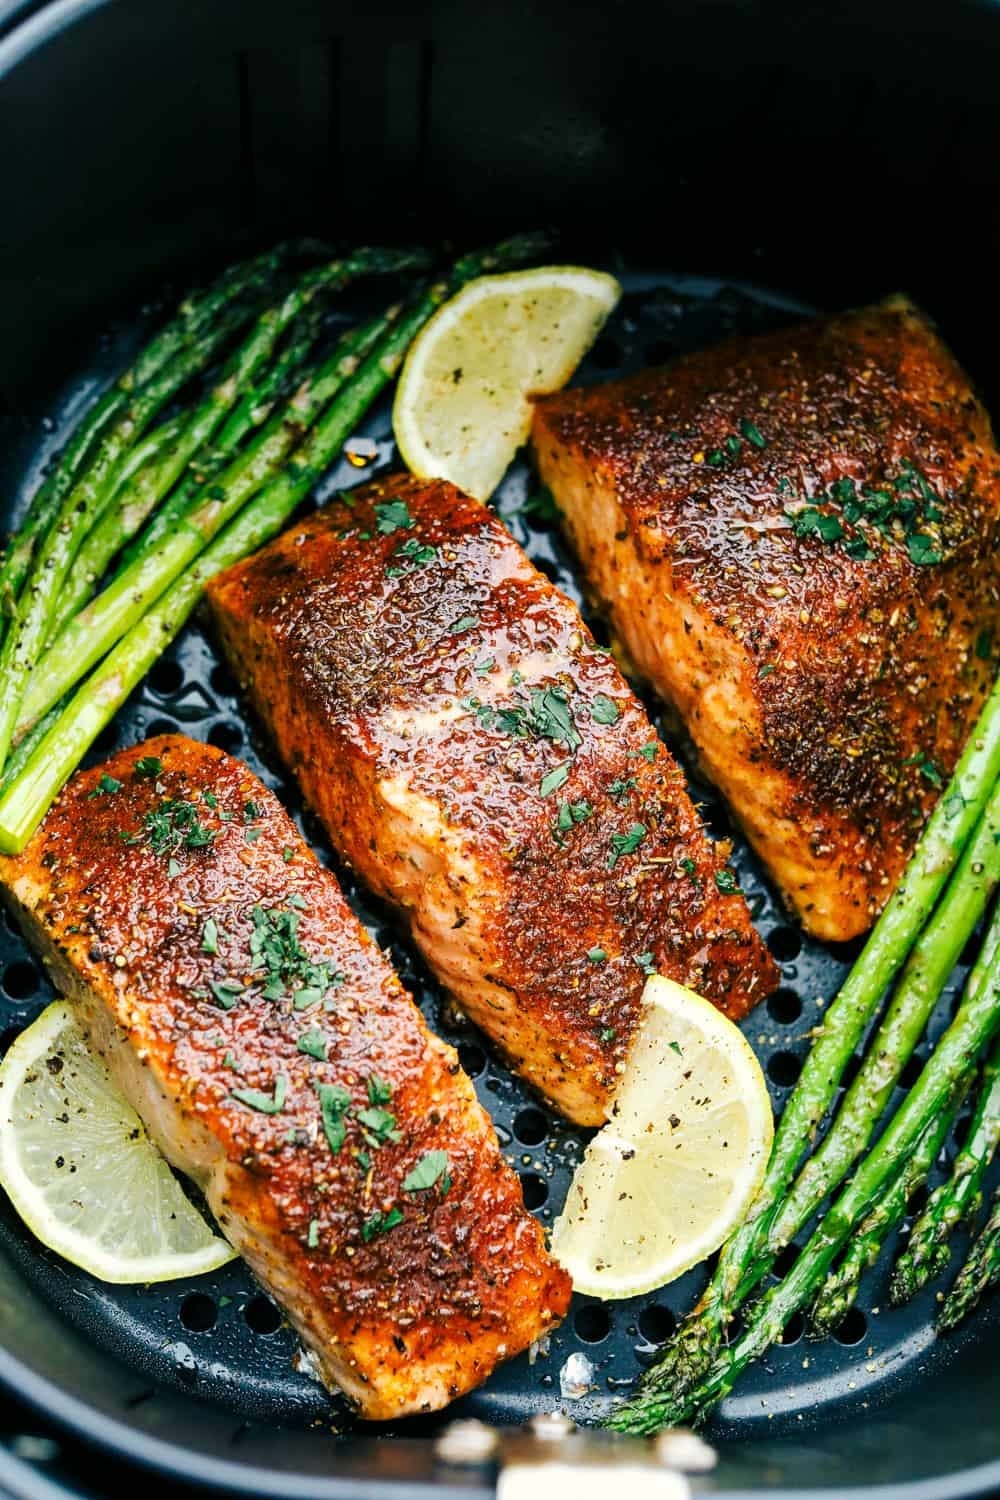 Salmon and asparagus in the air fryer.